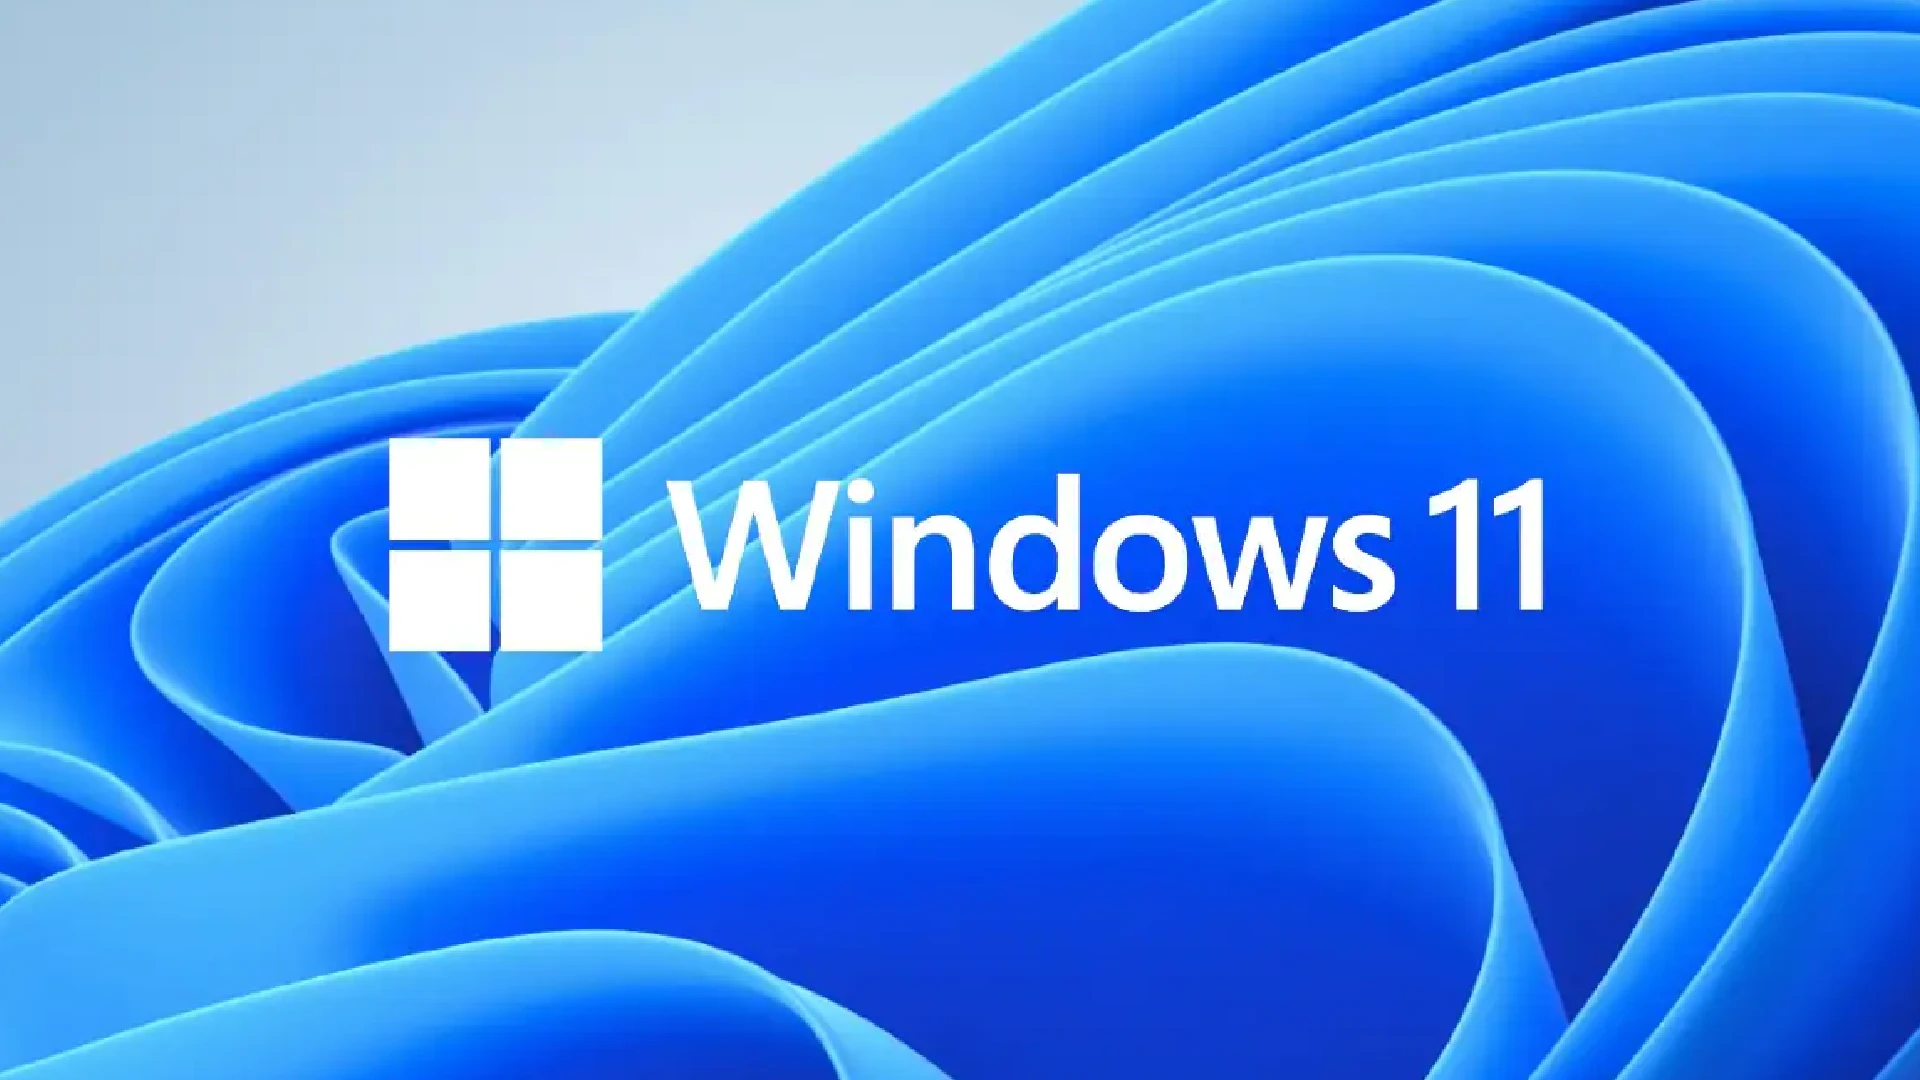 Windows 11 Version 22H2 was Quietly Confirmed by Microsoft.